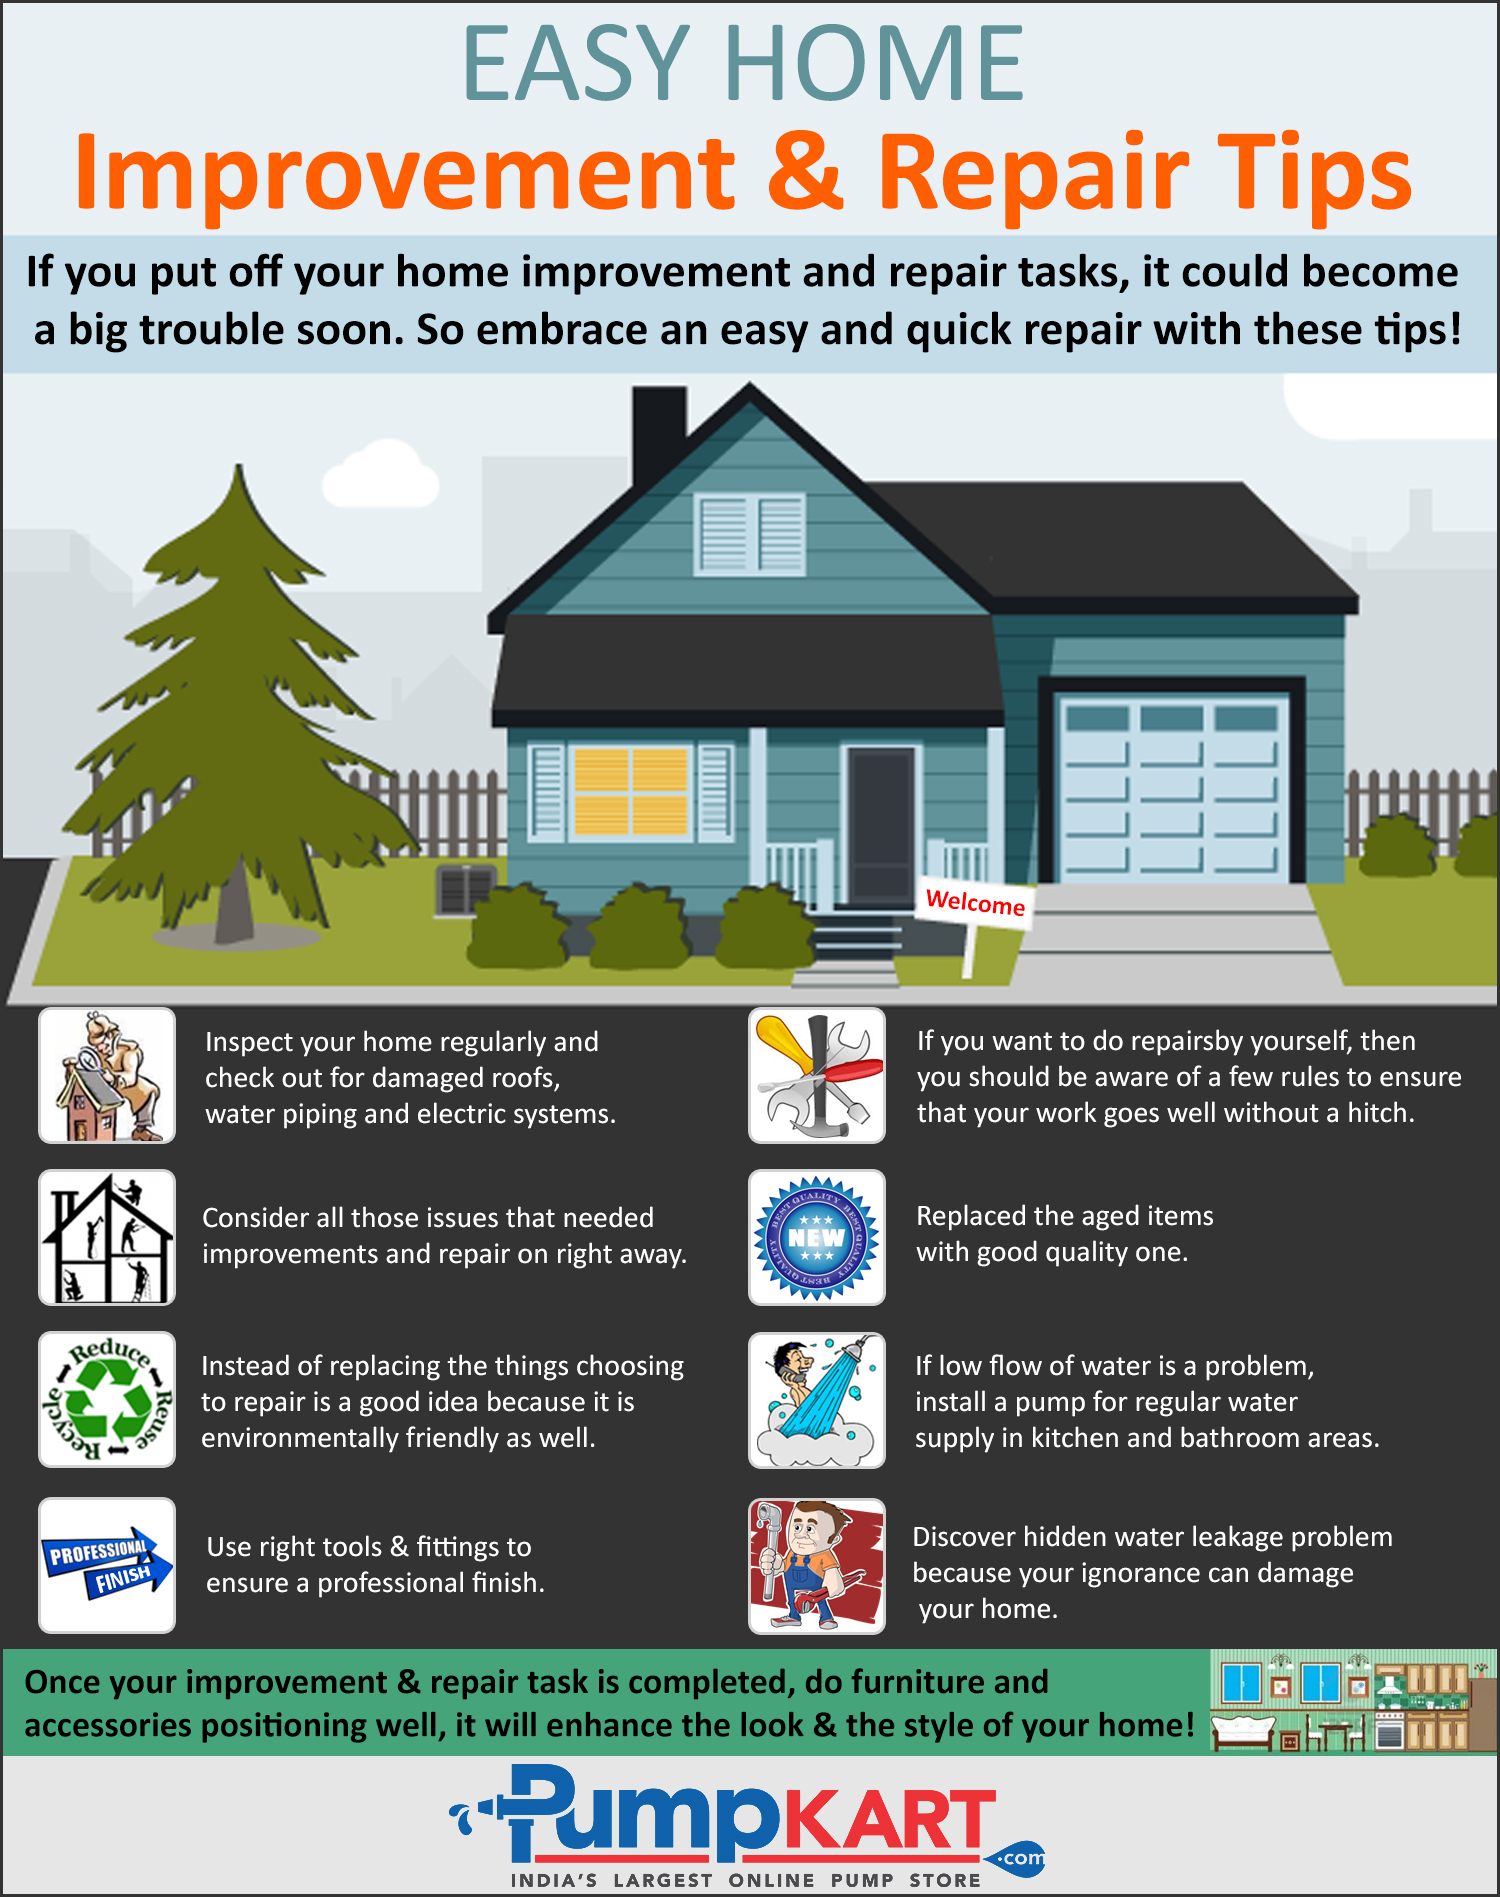 https://i.visual.ly/images/easy-home-improvements-and-repair-tips_55c1d462699a3.jpg